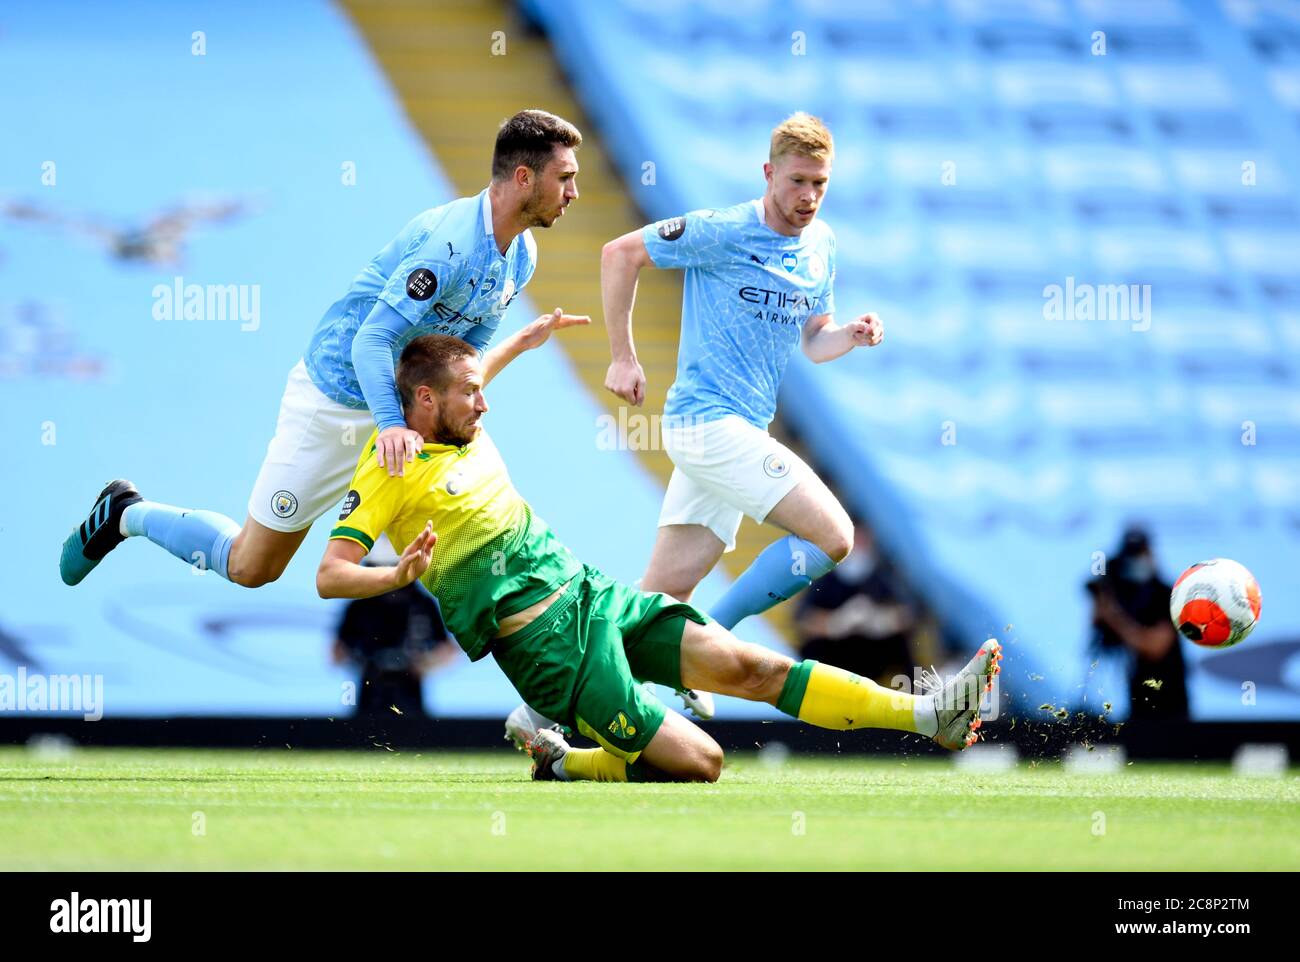 Manchester City's Aymeric Laporte and Norwich City's Marco Stiepermann (right) during the Premier League match at the Etihad Stadium, Manchester. Stock Photo